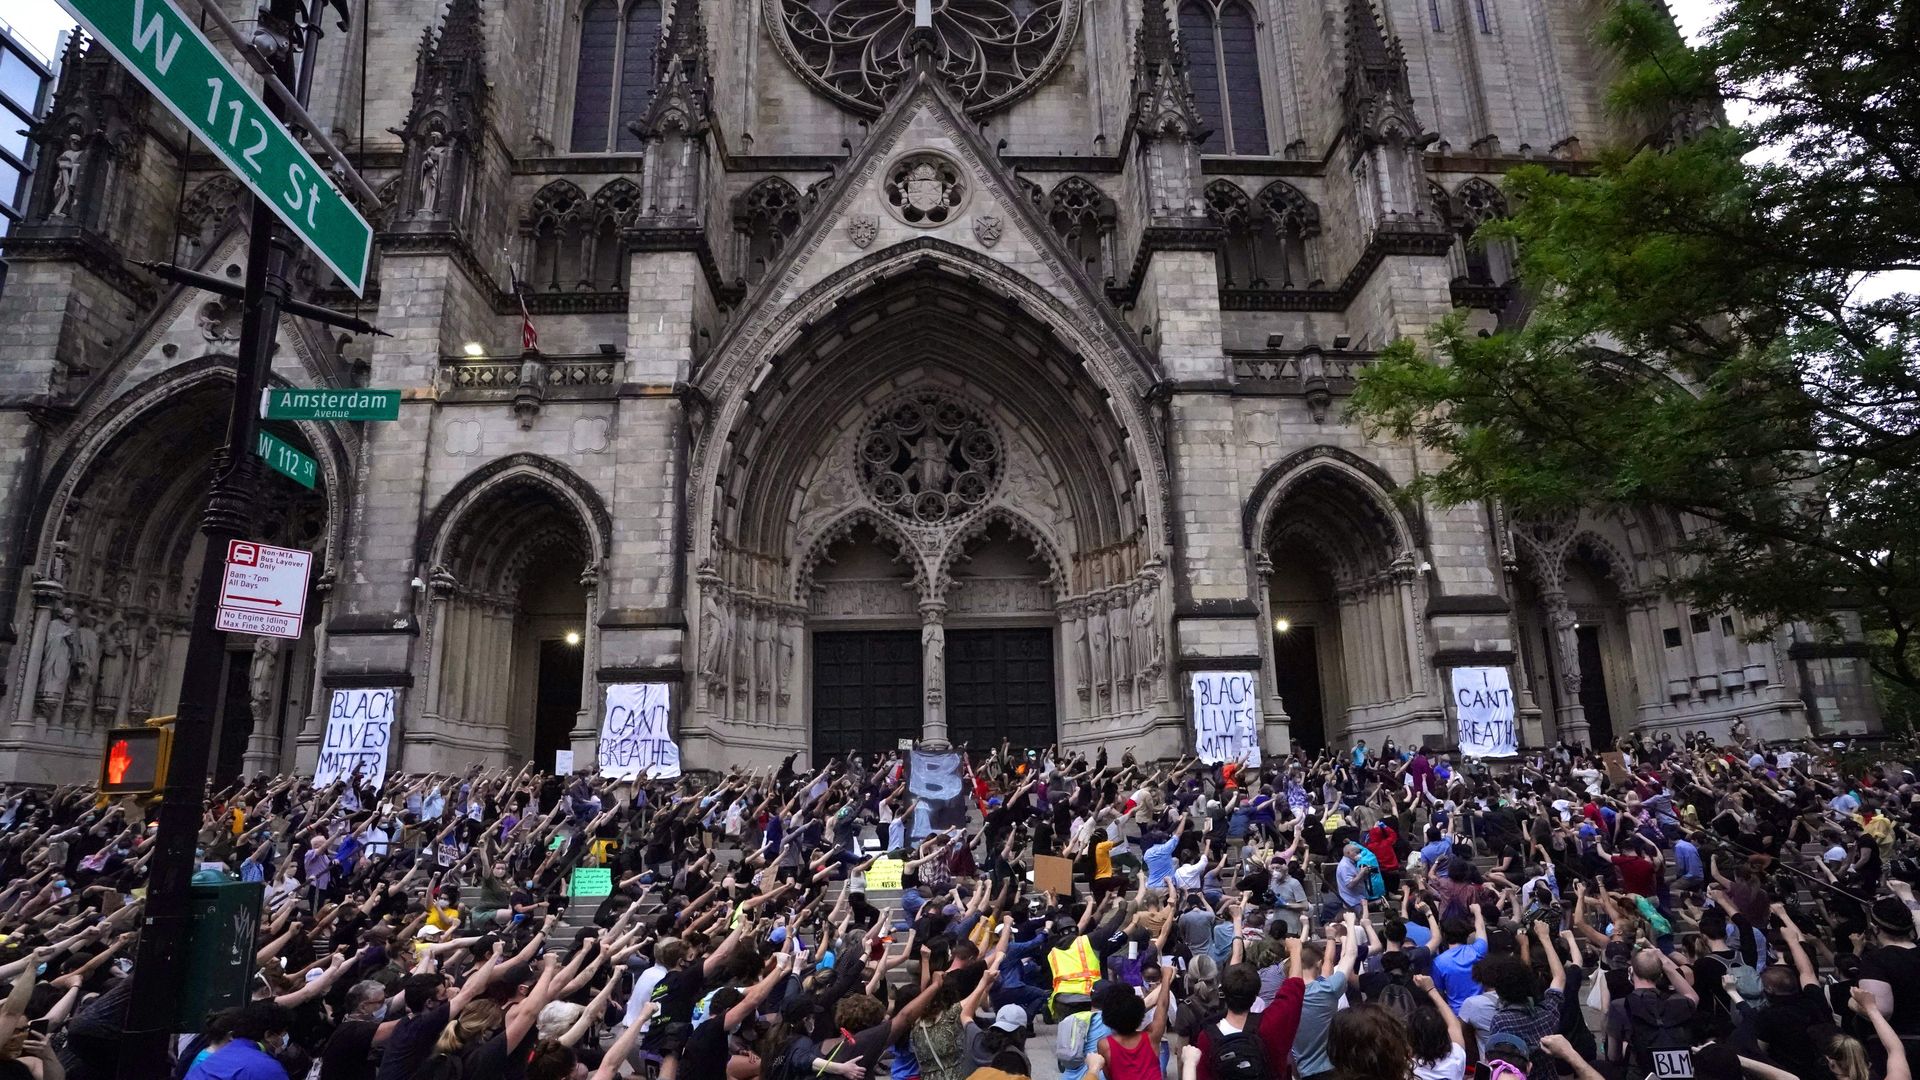 A crowd stands outside a New York City church amid a protest following the death of George Floyd.